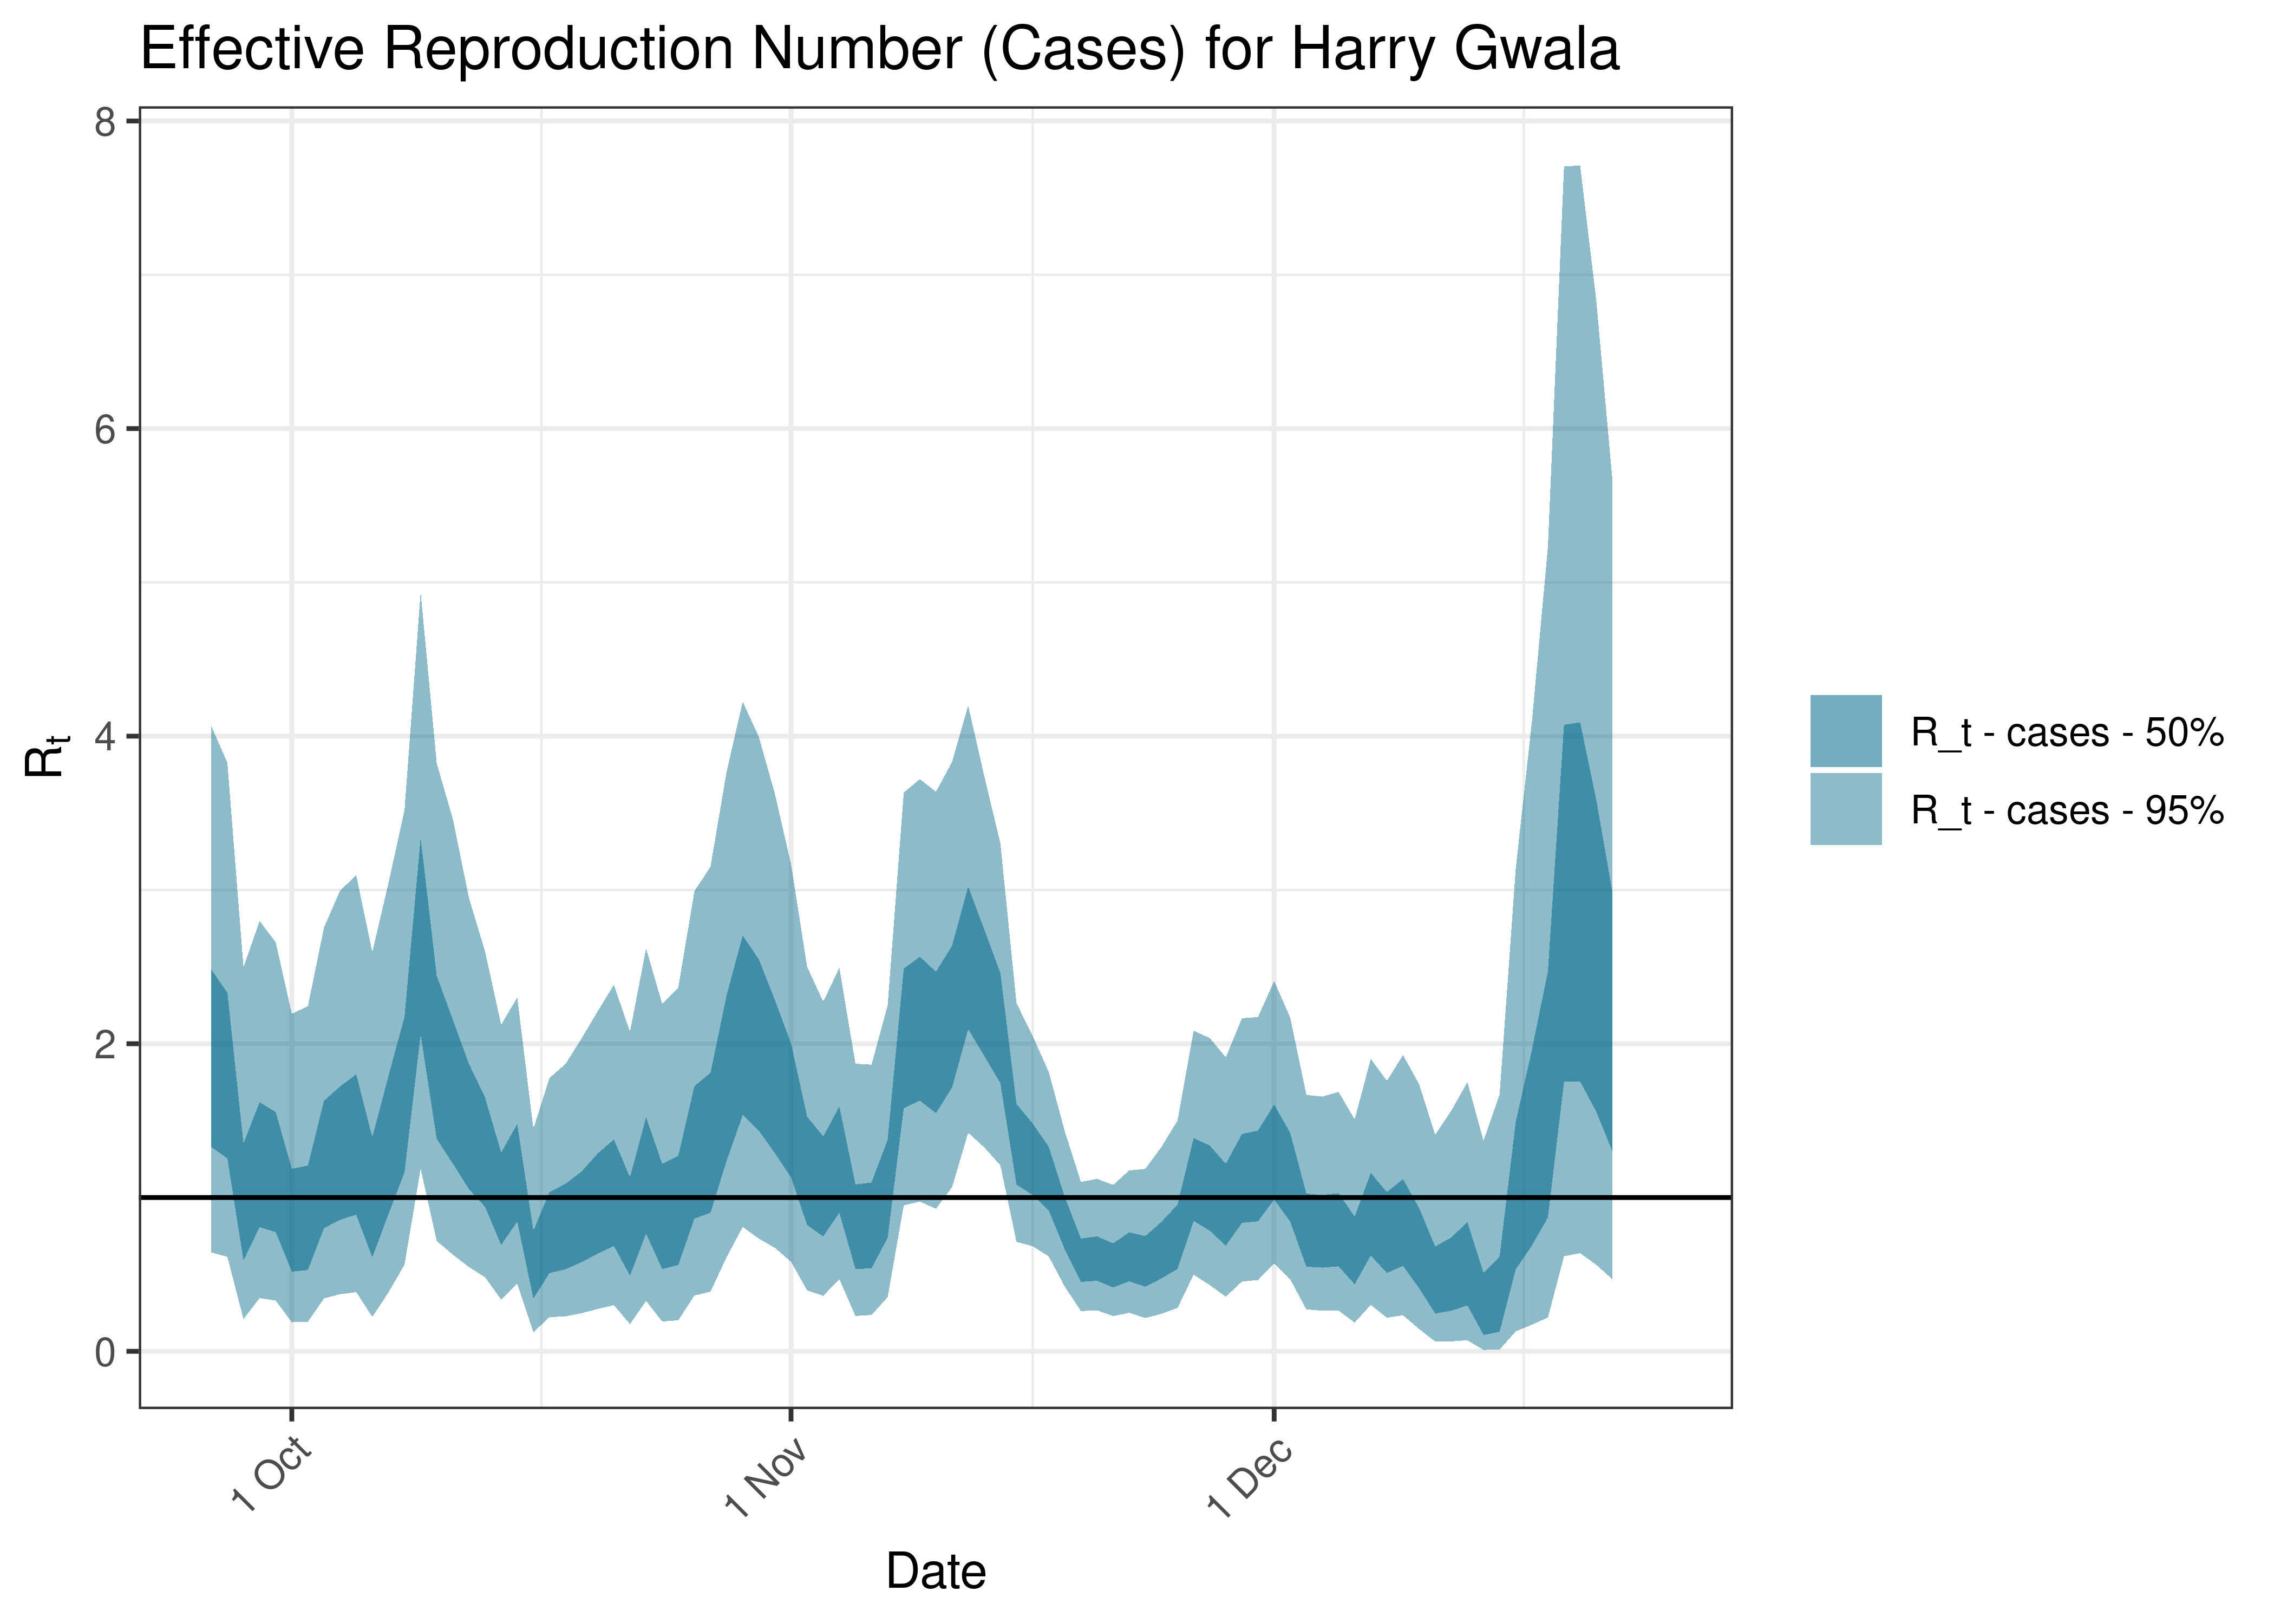 Estimated Effective Reproduction Number Based on Cases for Harry Gwala over last 90 days